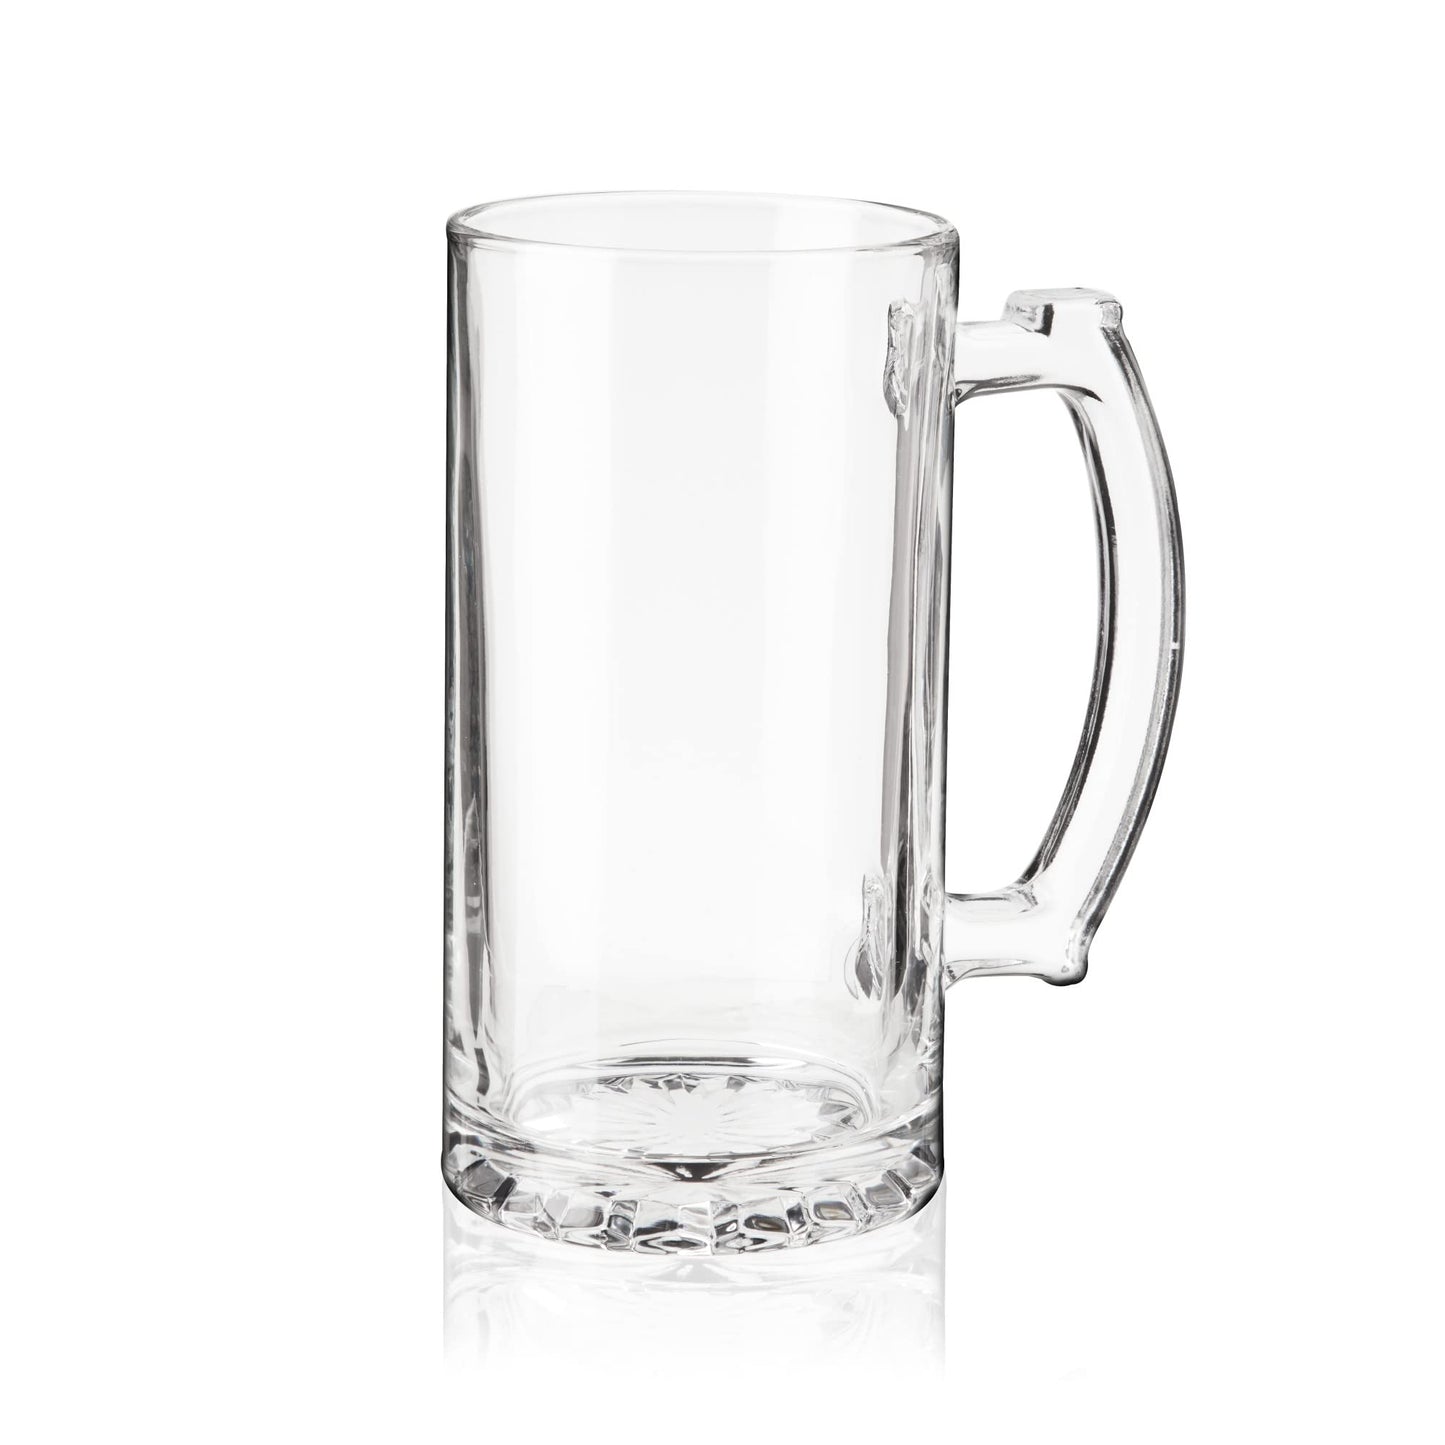 25 oz Clear Beer Glass Cup